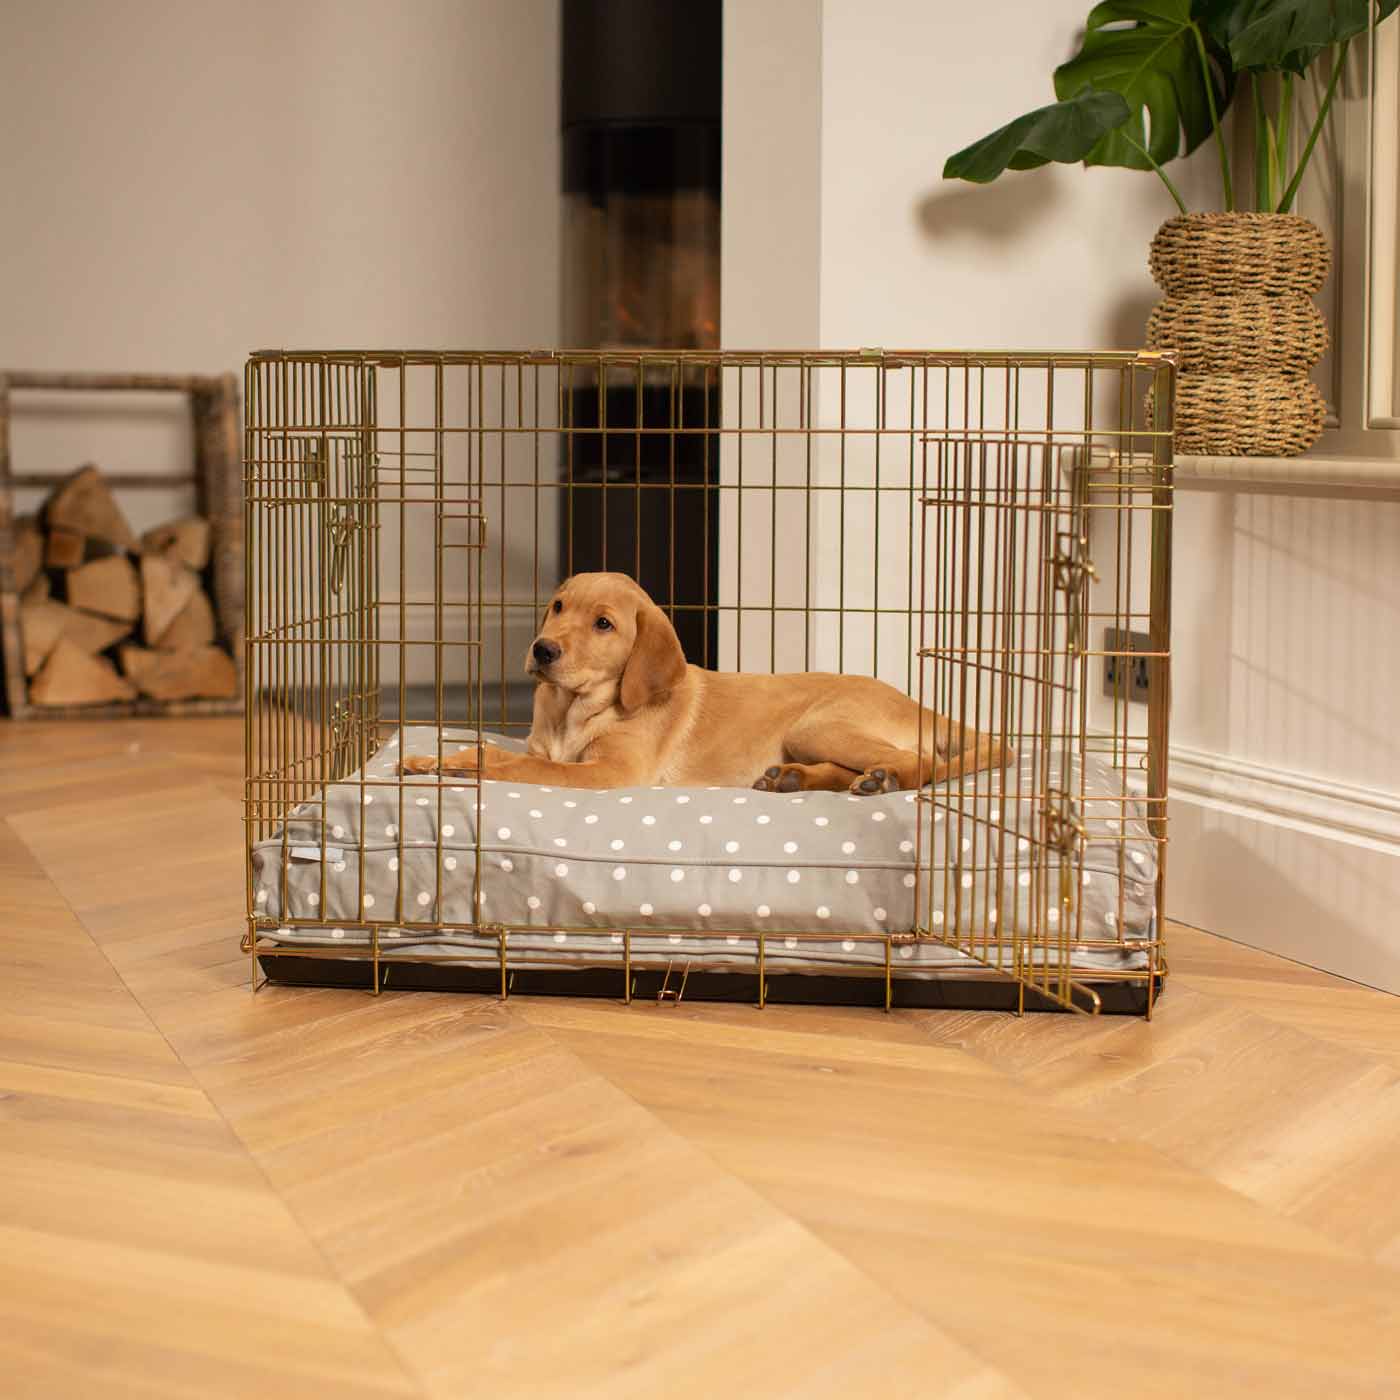 Luxury Gold Dog Cage Set With Cushion, in Grey Spot. The Perfect Dog Cage For The Ultimate Naptime, Available Now at Lords & Labradors US